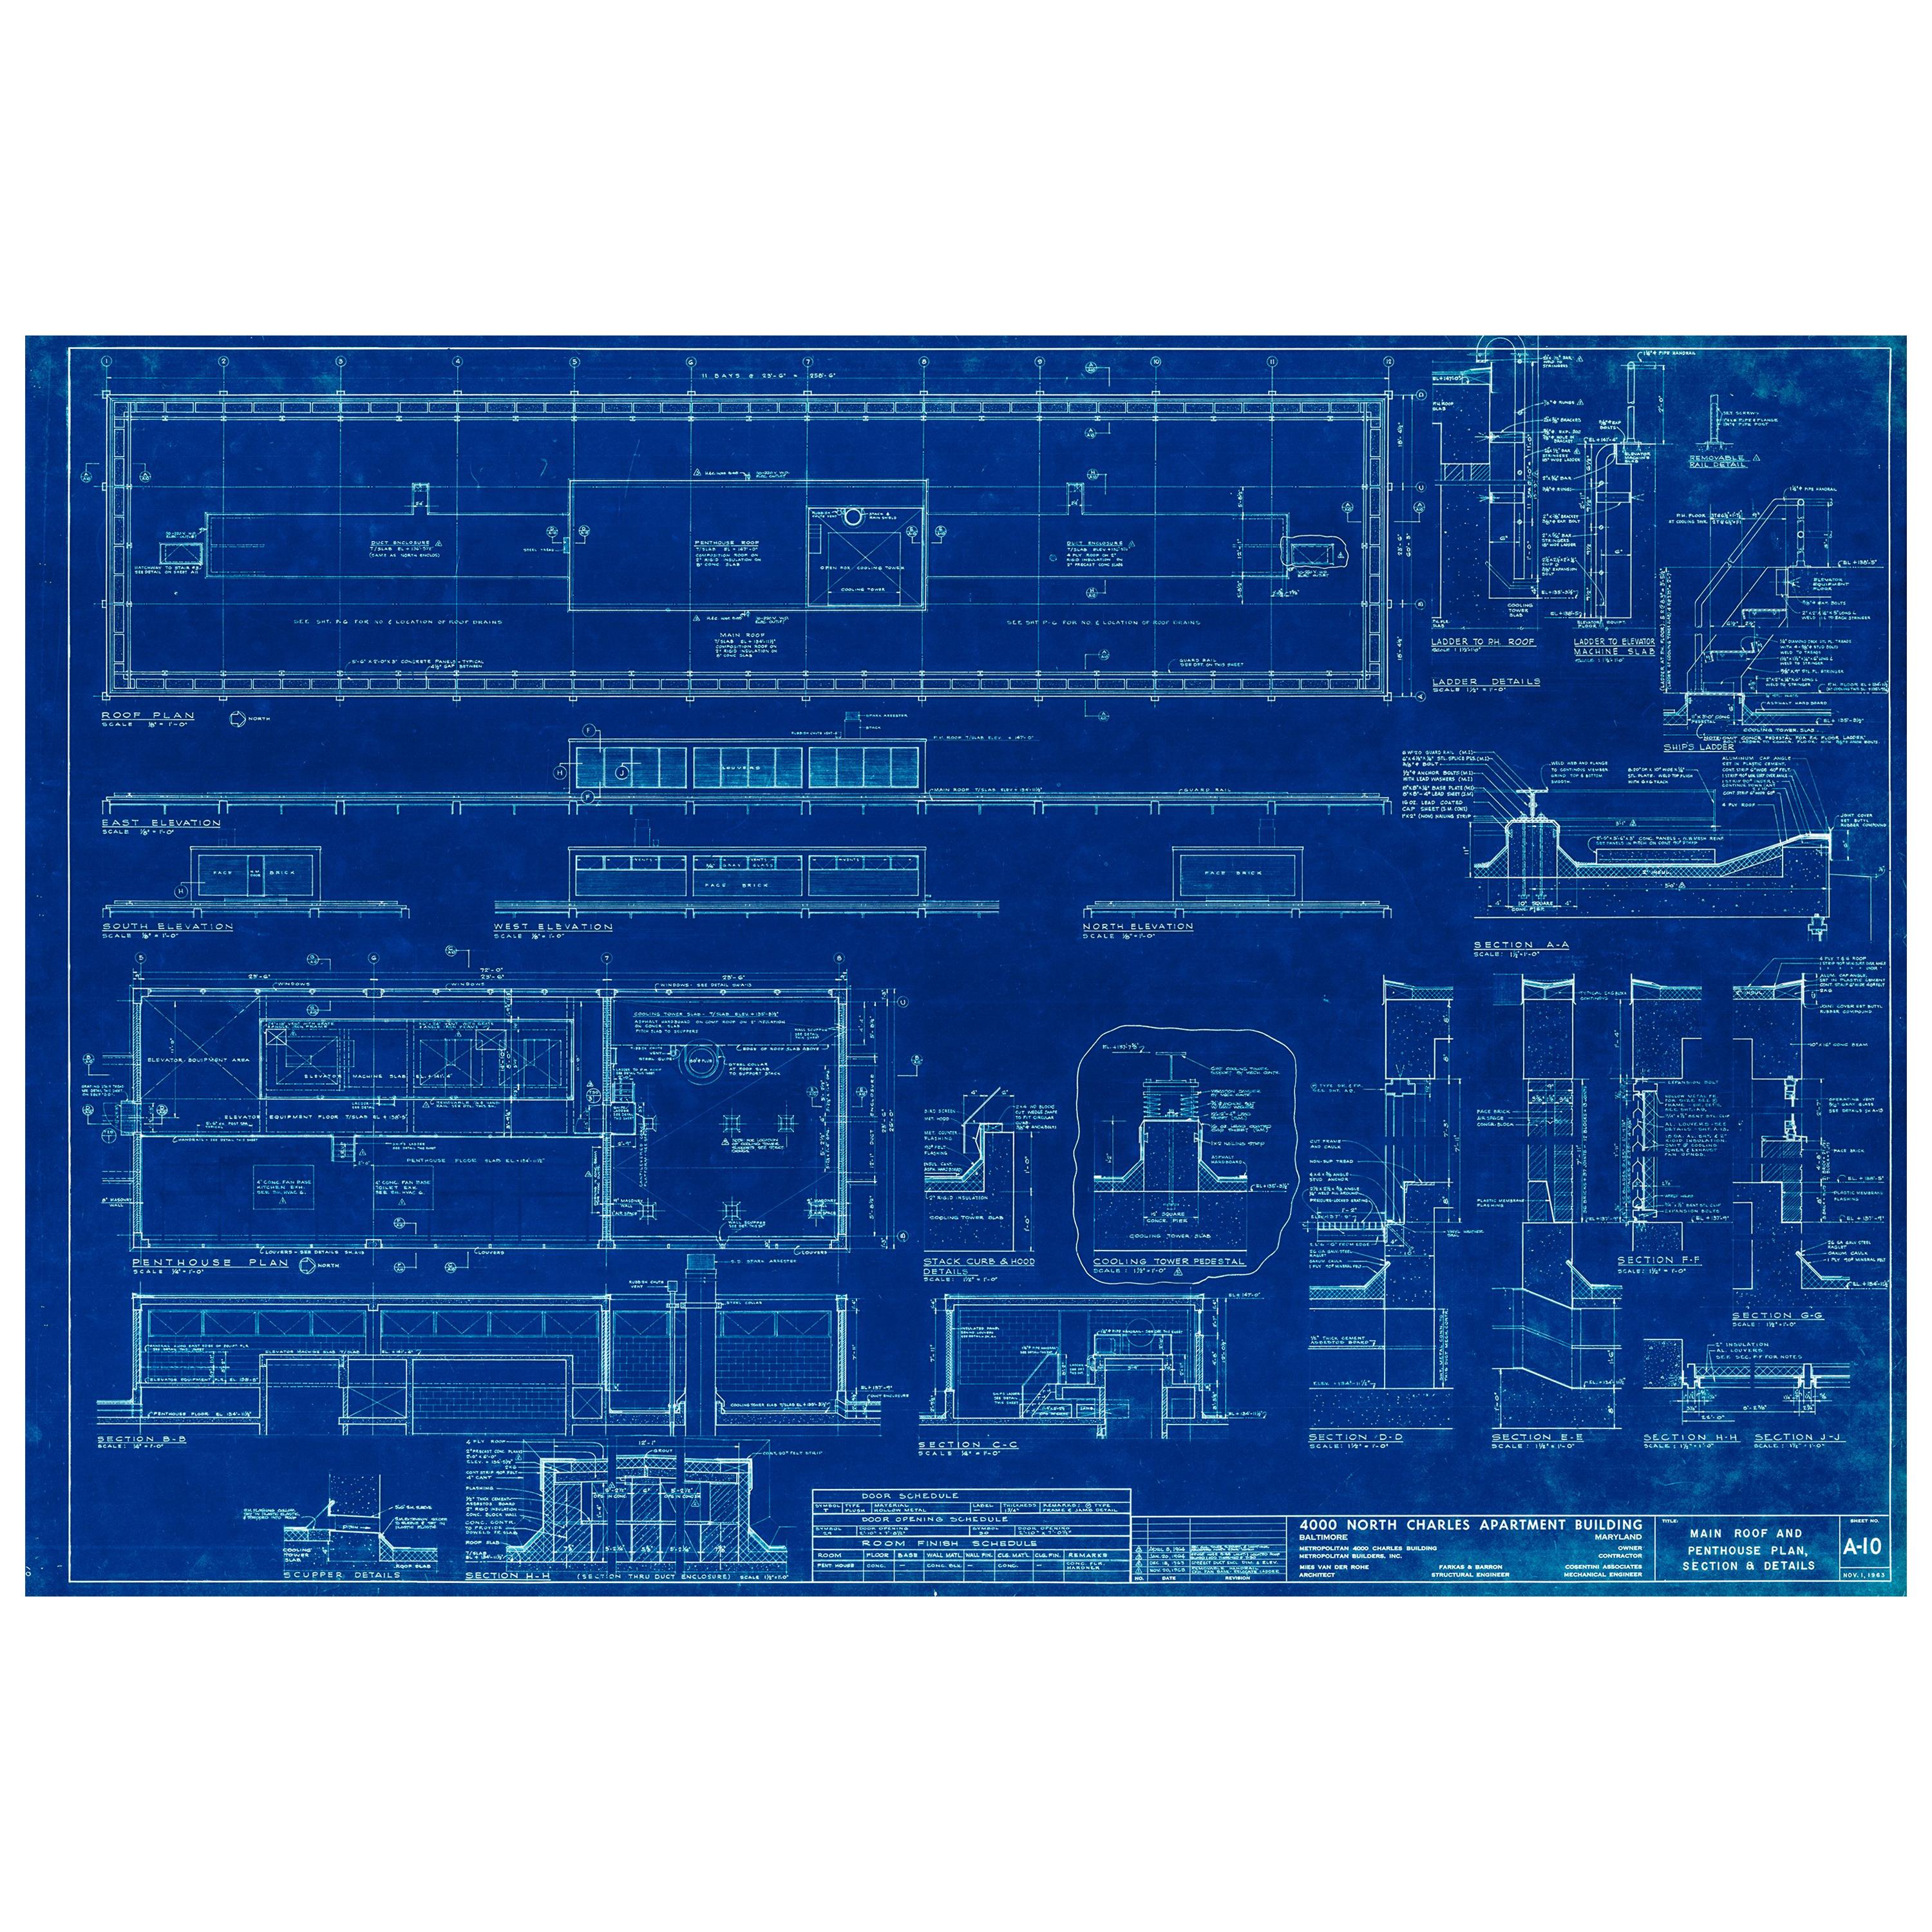 Mies van der Rohe Blueprint, 4000 N. Charles Baltimore, Md, Roof and Penthouse For Sale